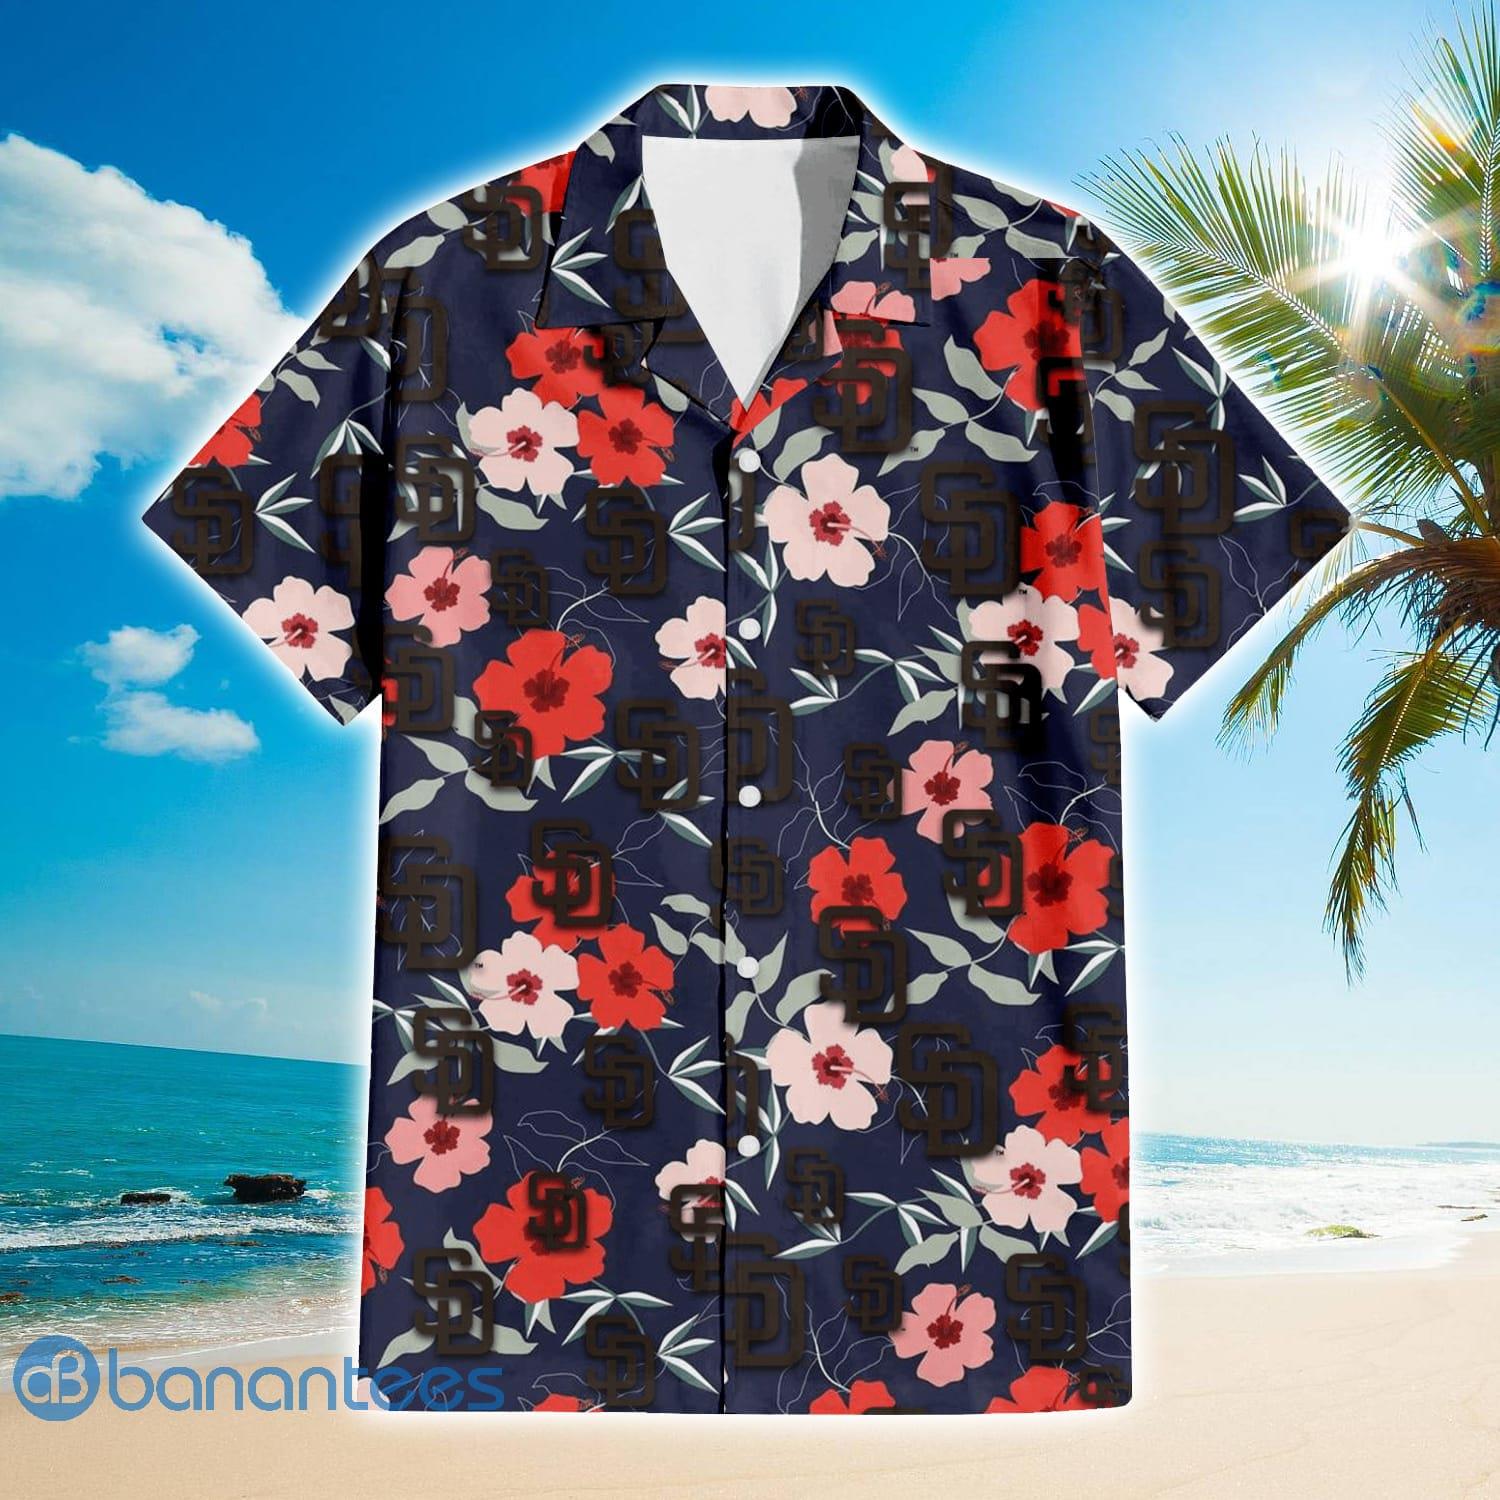 NEW FASHION 2023 San Diego Padres Hawaiian Shirt flower summer gift for fans